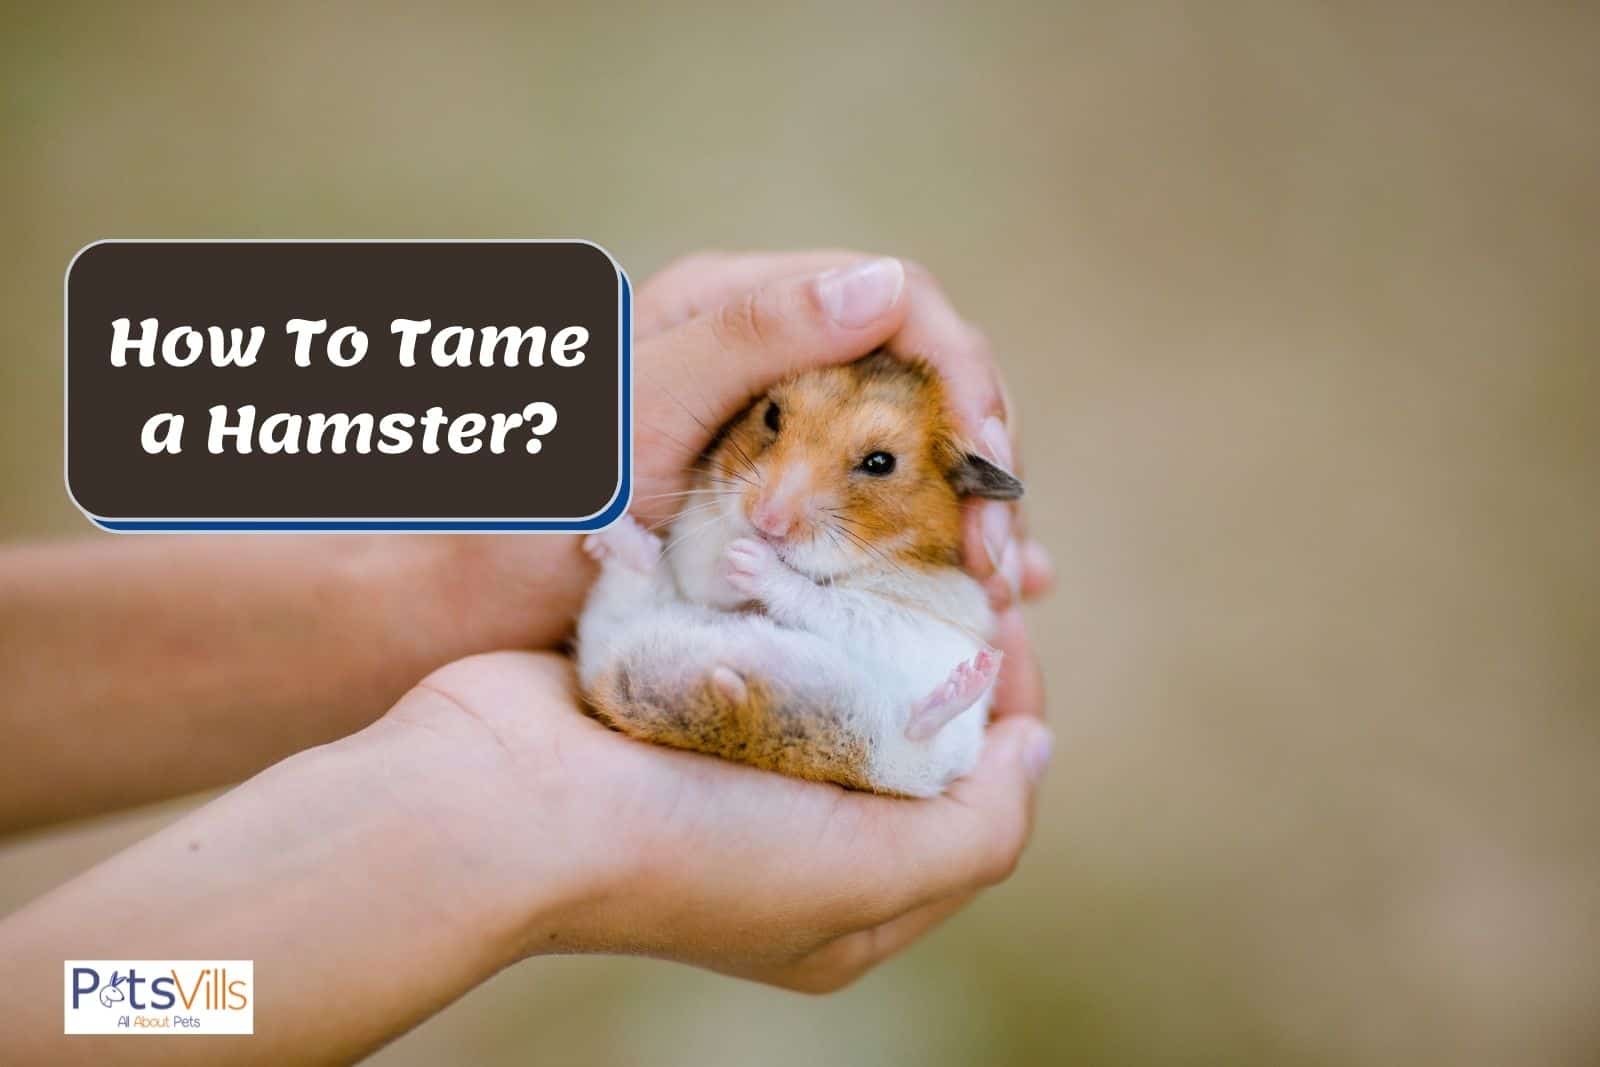 3. Set realistic expectations for your hamster's progress in taming.